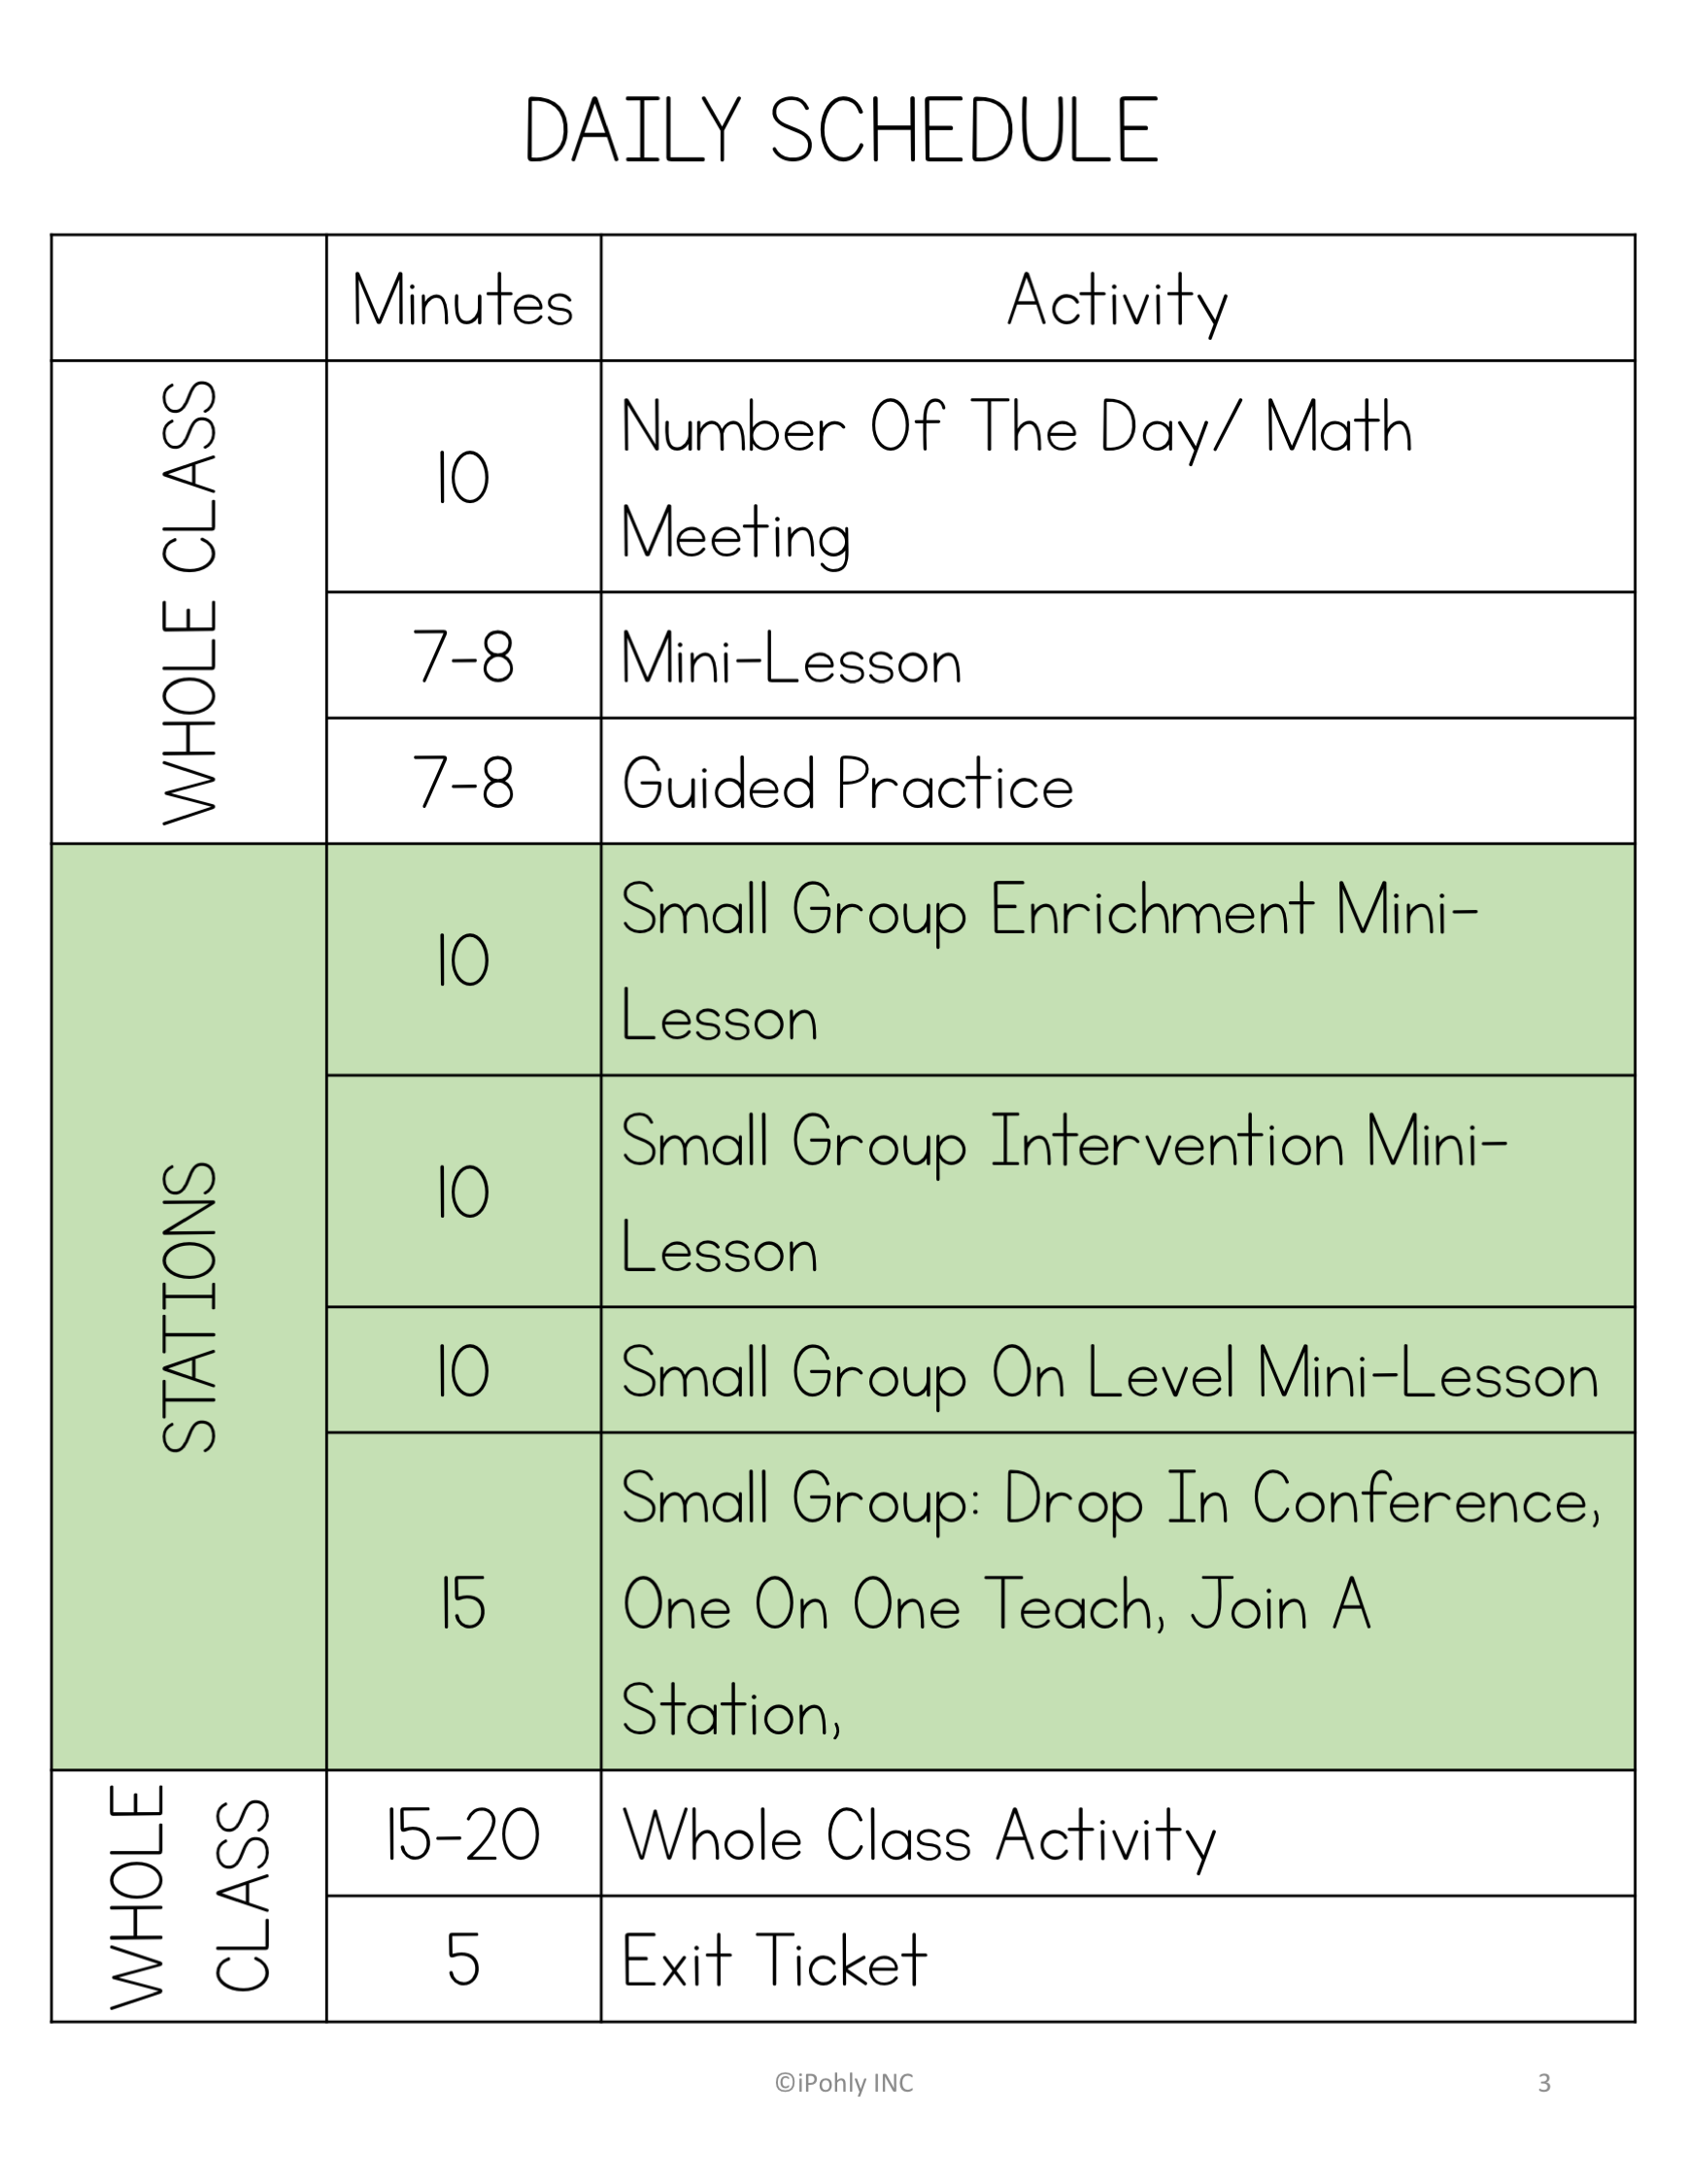 Guided Math Schedule   iPohly INC